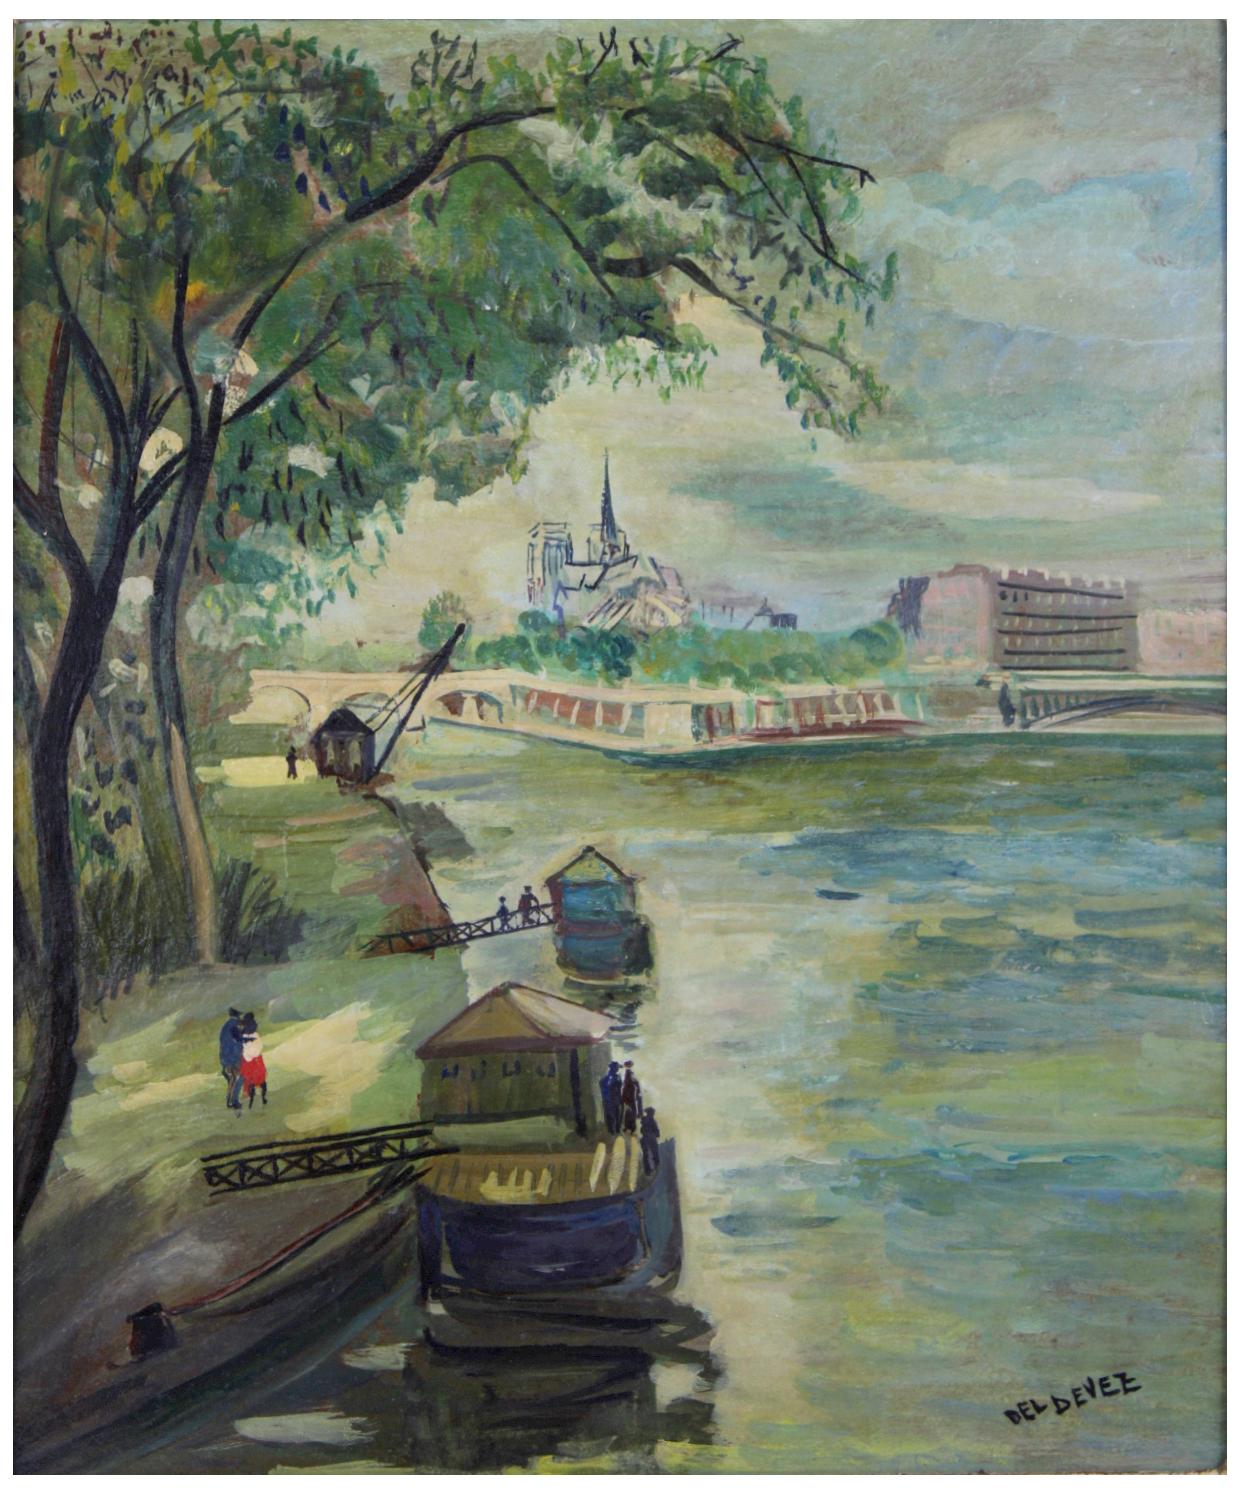 *Dimensions include the frame

This oil painting of the Seine in Paris, with its expressive brushstrokes and vibrant depiction of light on water, echoes the techniques of famous Impressionist painters like Claude Monet. The way the artist captures